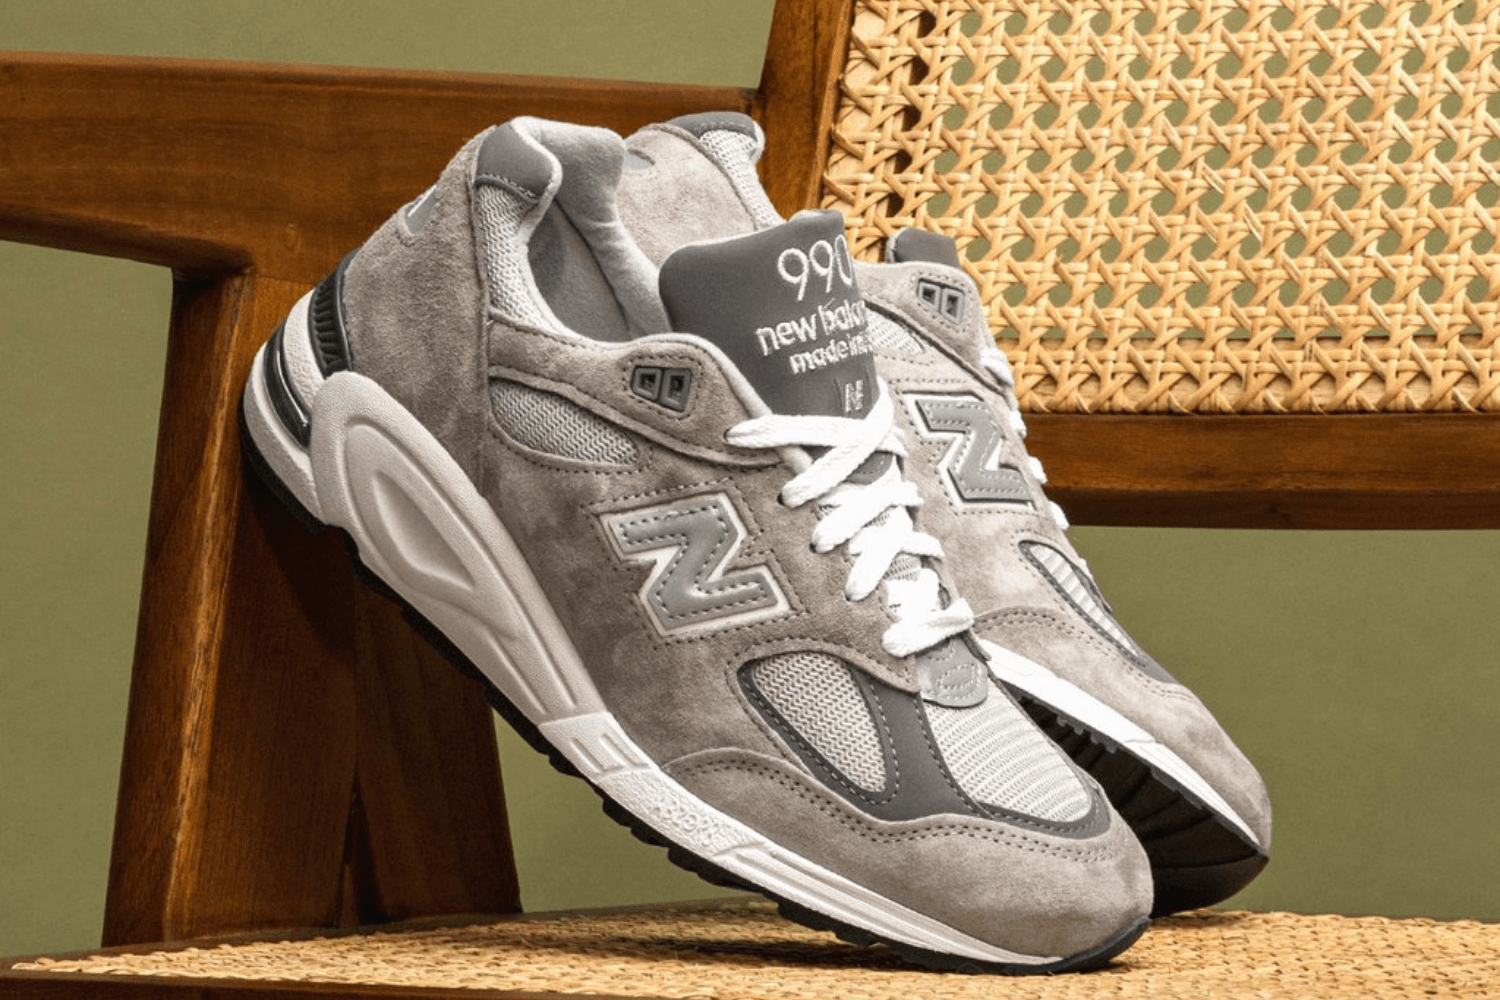 The New Balance Made in USA 990v2 returns